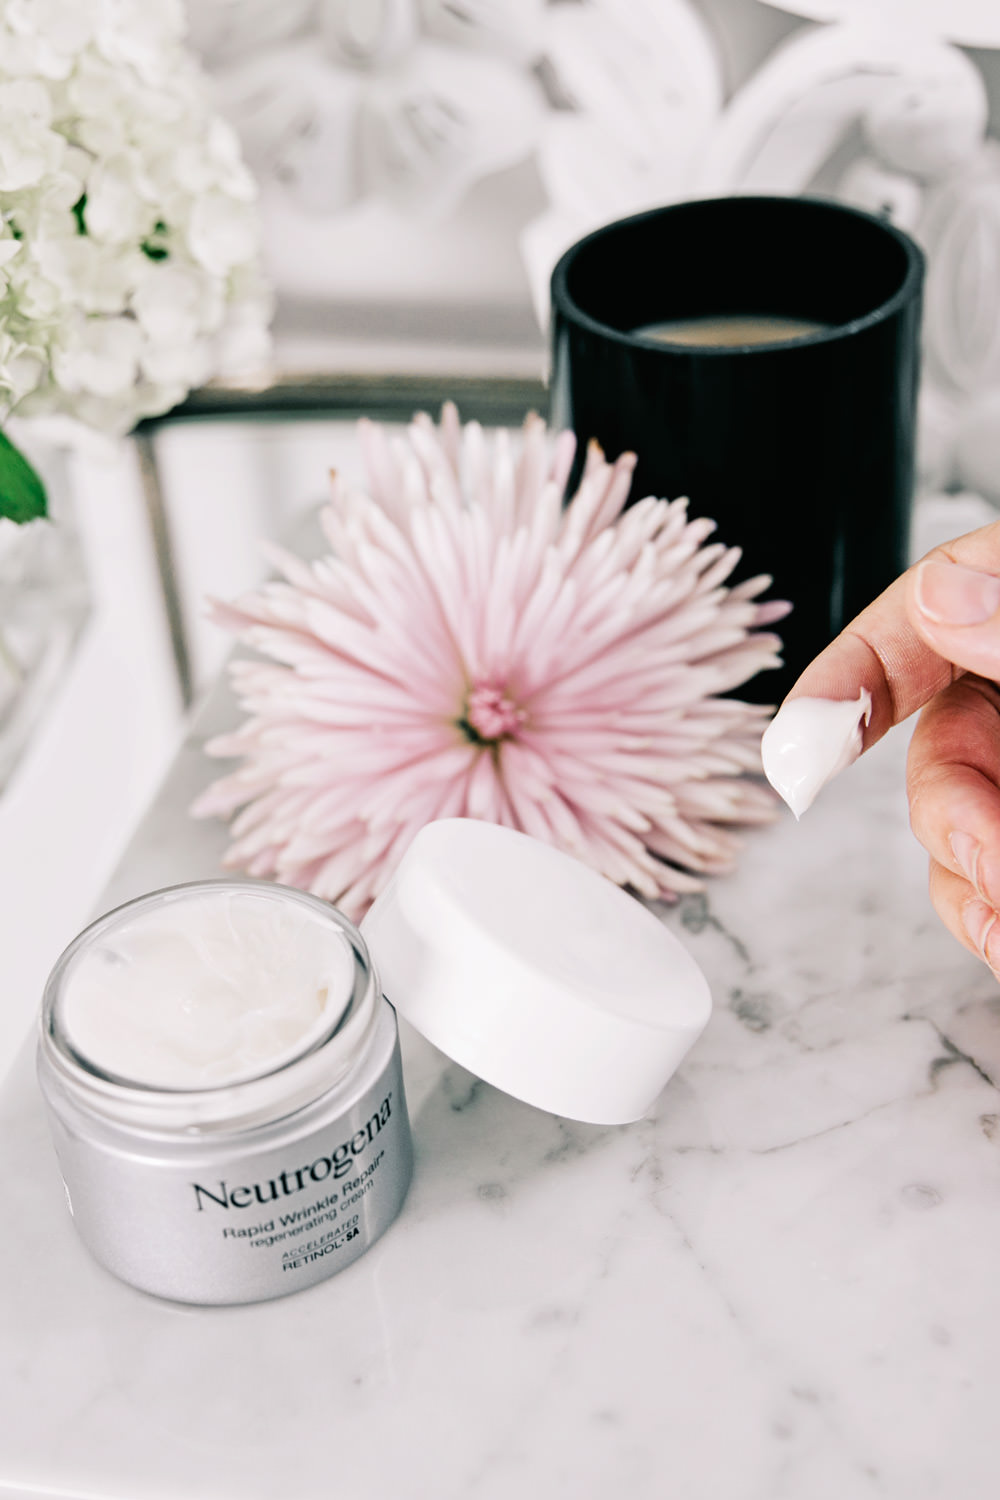 Dash of Darling shares how to  reveal your younger skin with Neutrogena wrinkle cream